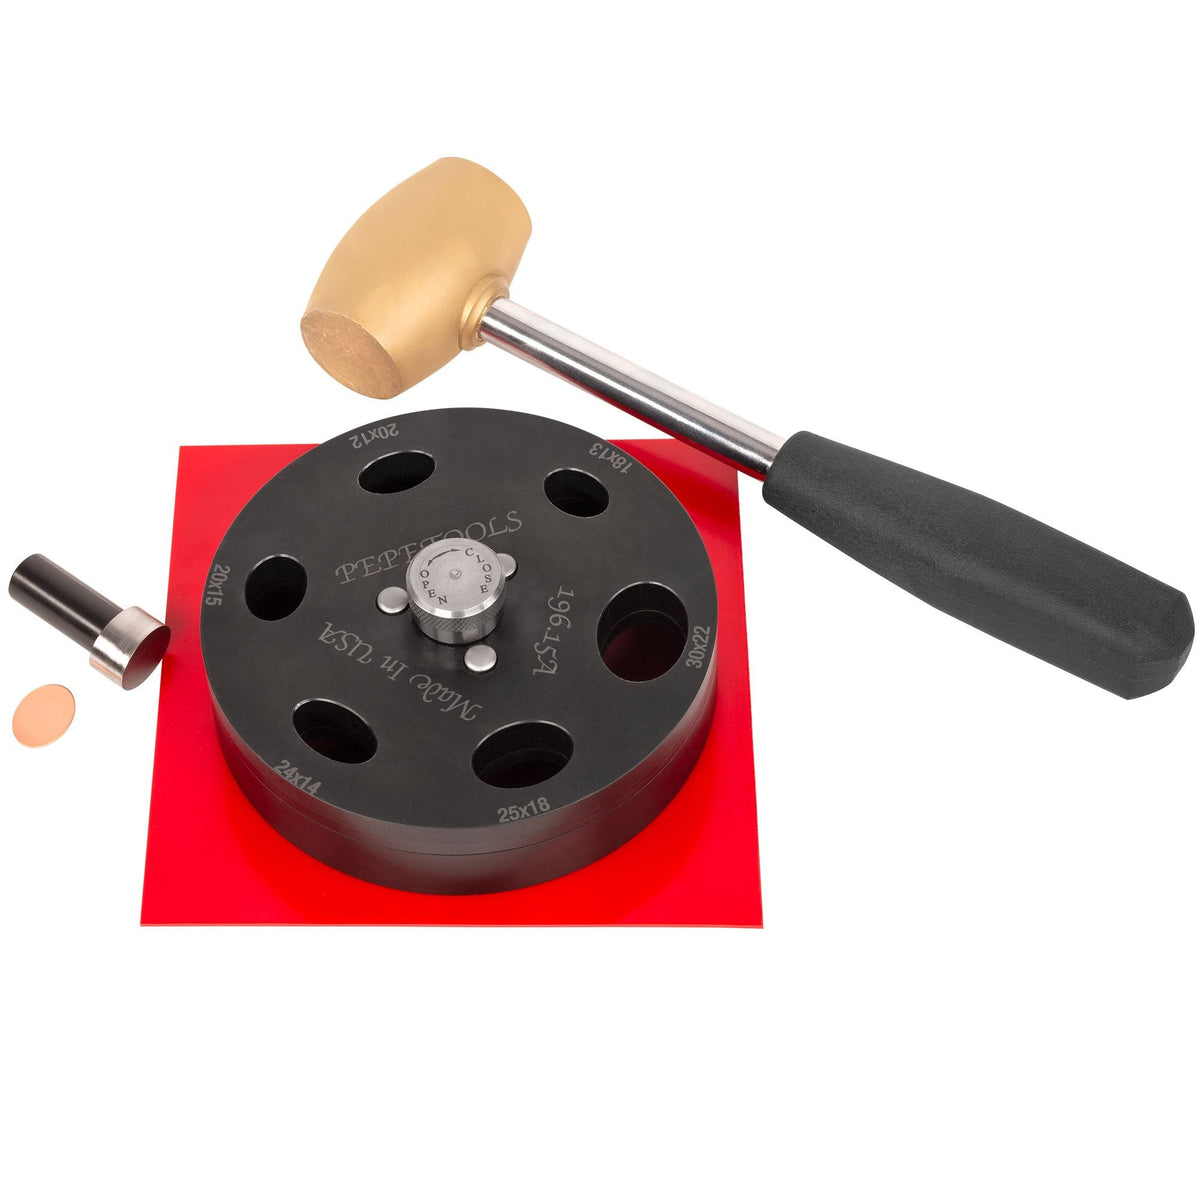 Pepetools™ Oval (Cabochon) Disc Cutter, 6 sizes included